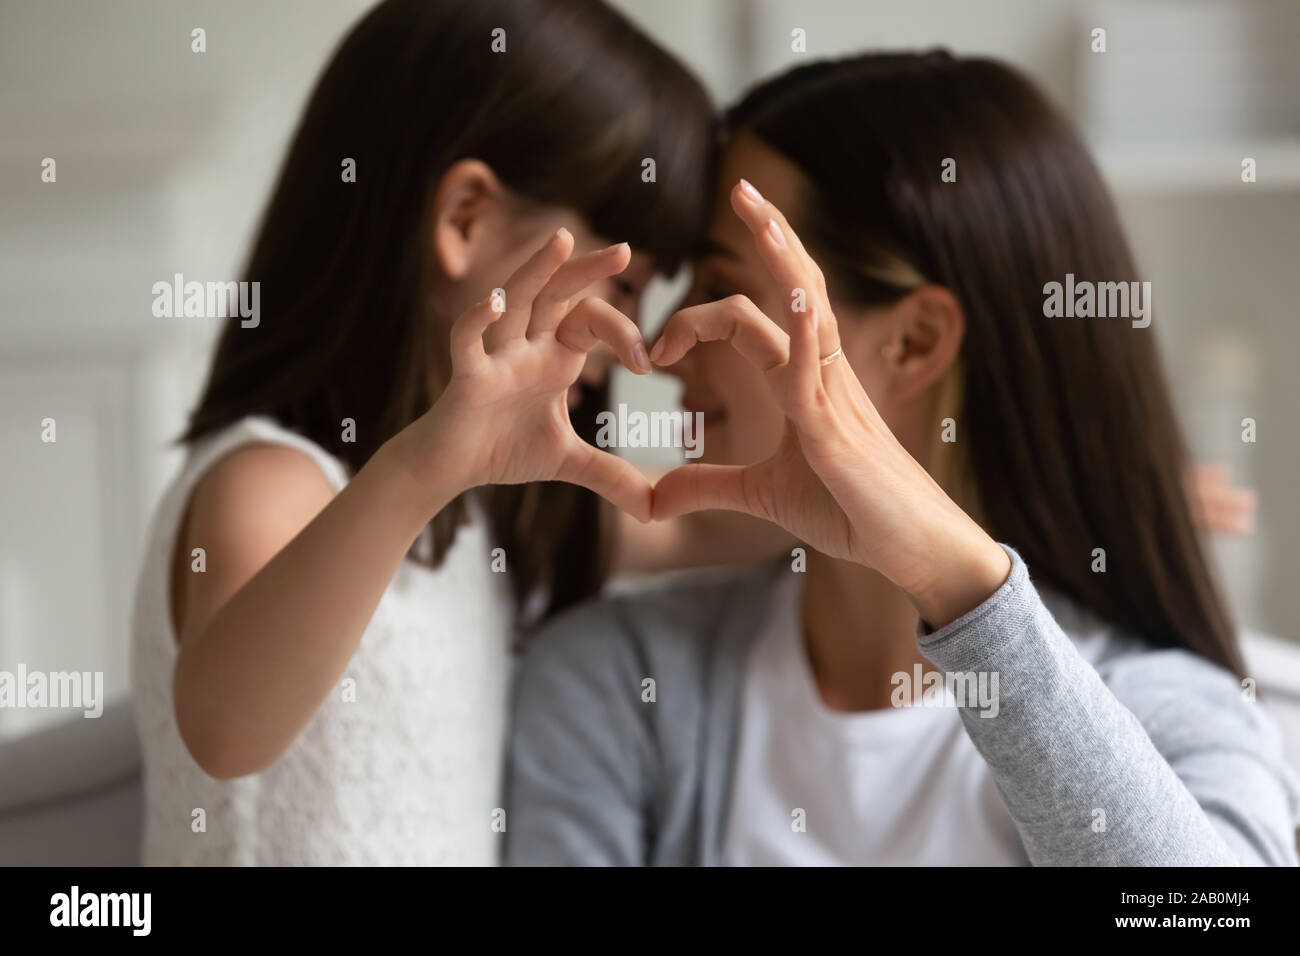 Mothers and daughters fingers showing heart symbol of love Stock Photo